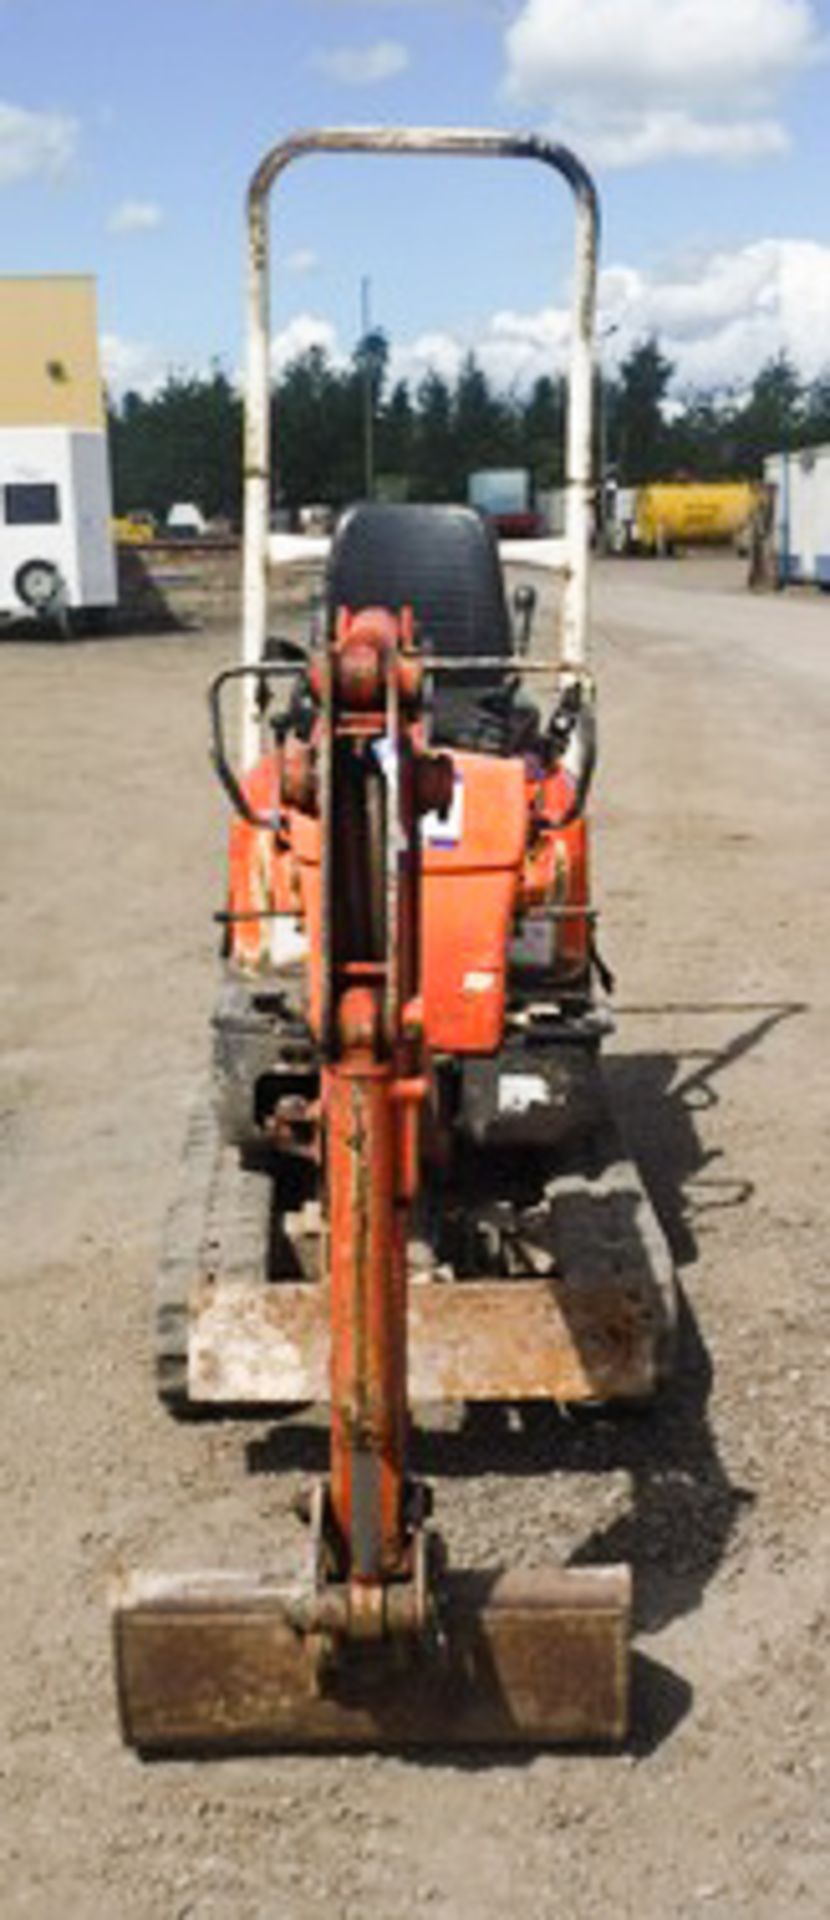 KUBOTA K008-3 ULTRA COMPACT EXCAVATOR C/W WITH BUCKET. SN12613. 3154 HRS. YEAR UNKNOWN - Image 2 of 18